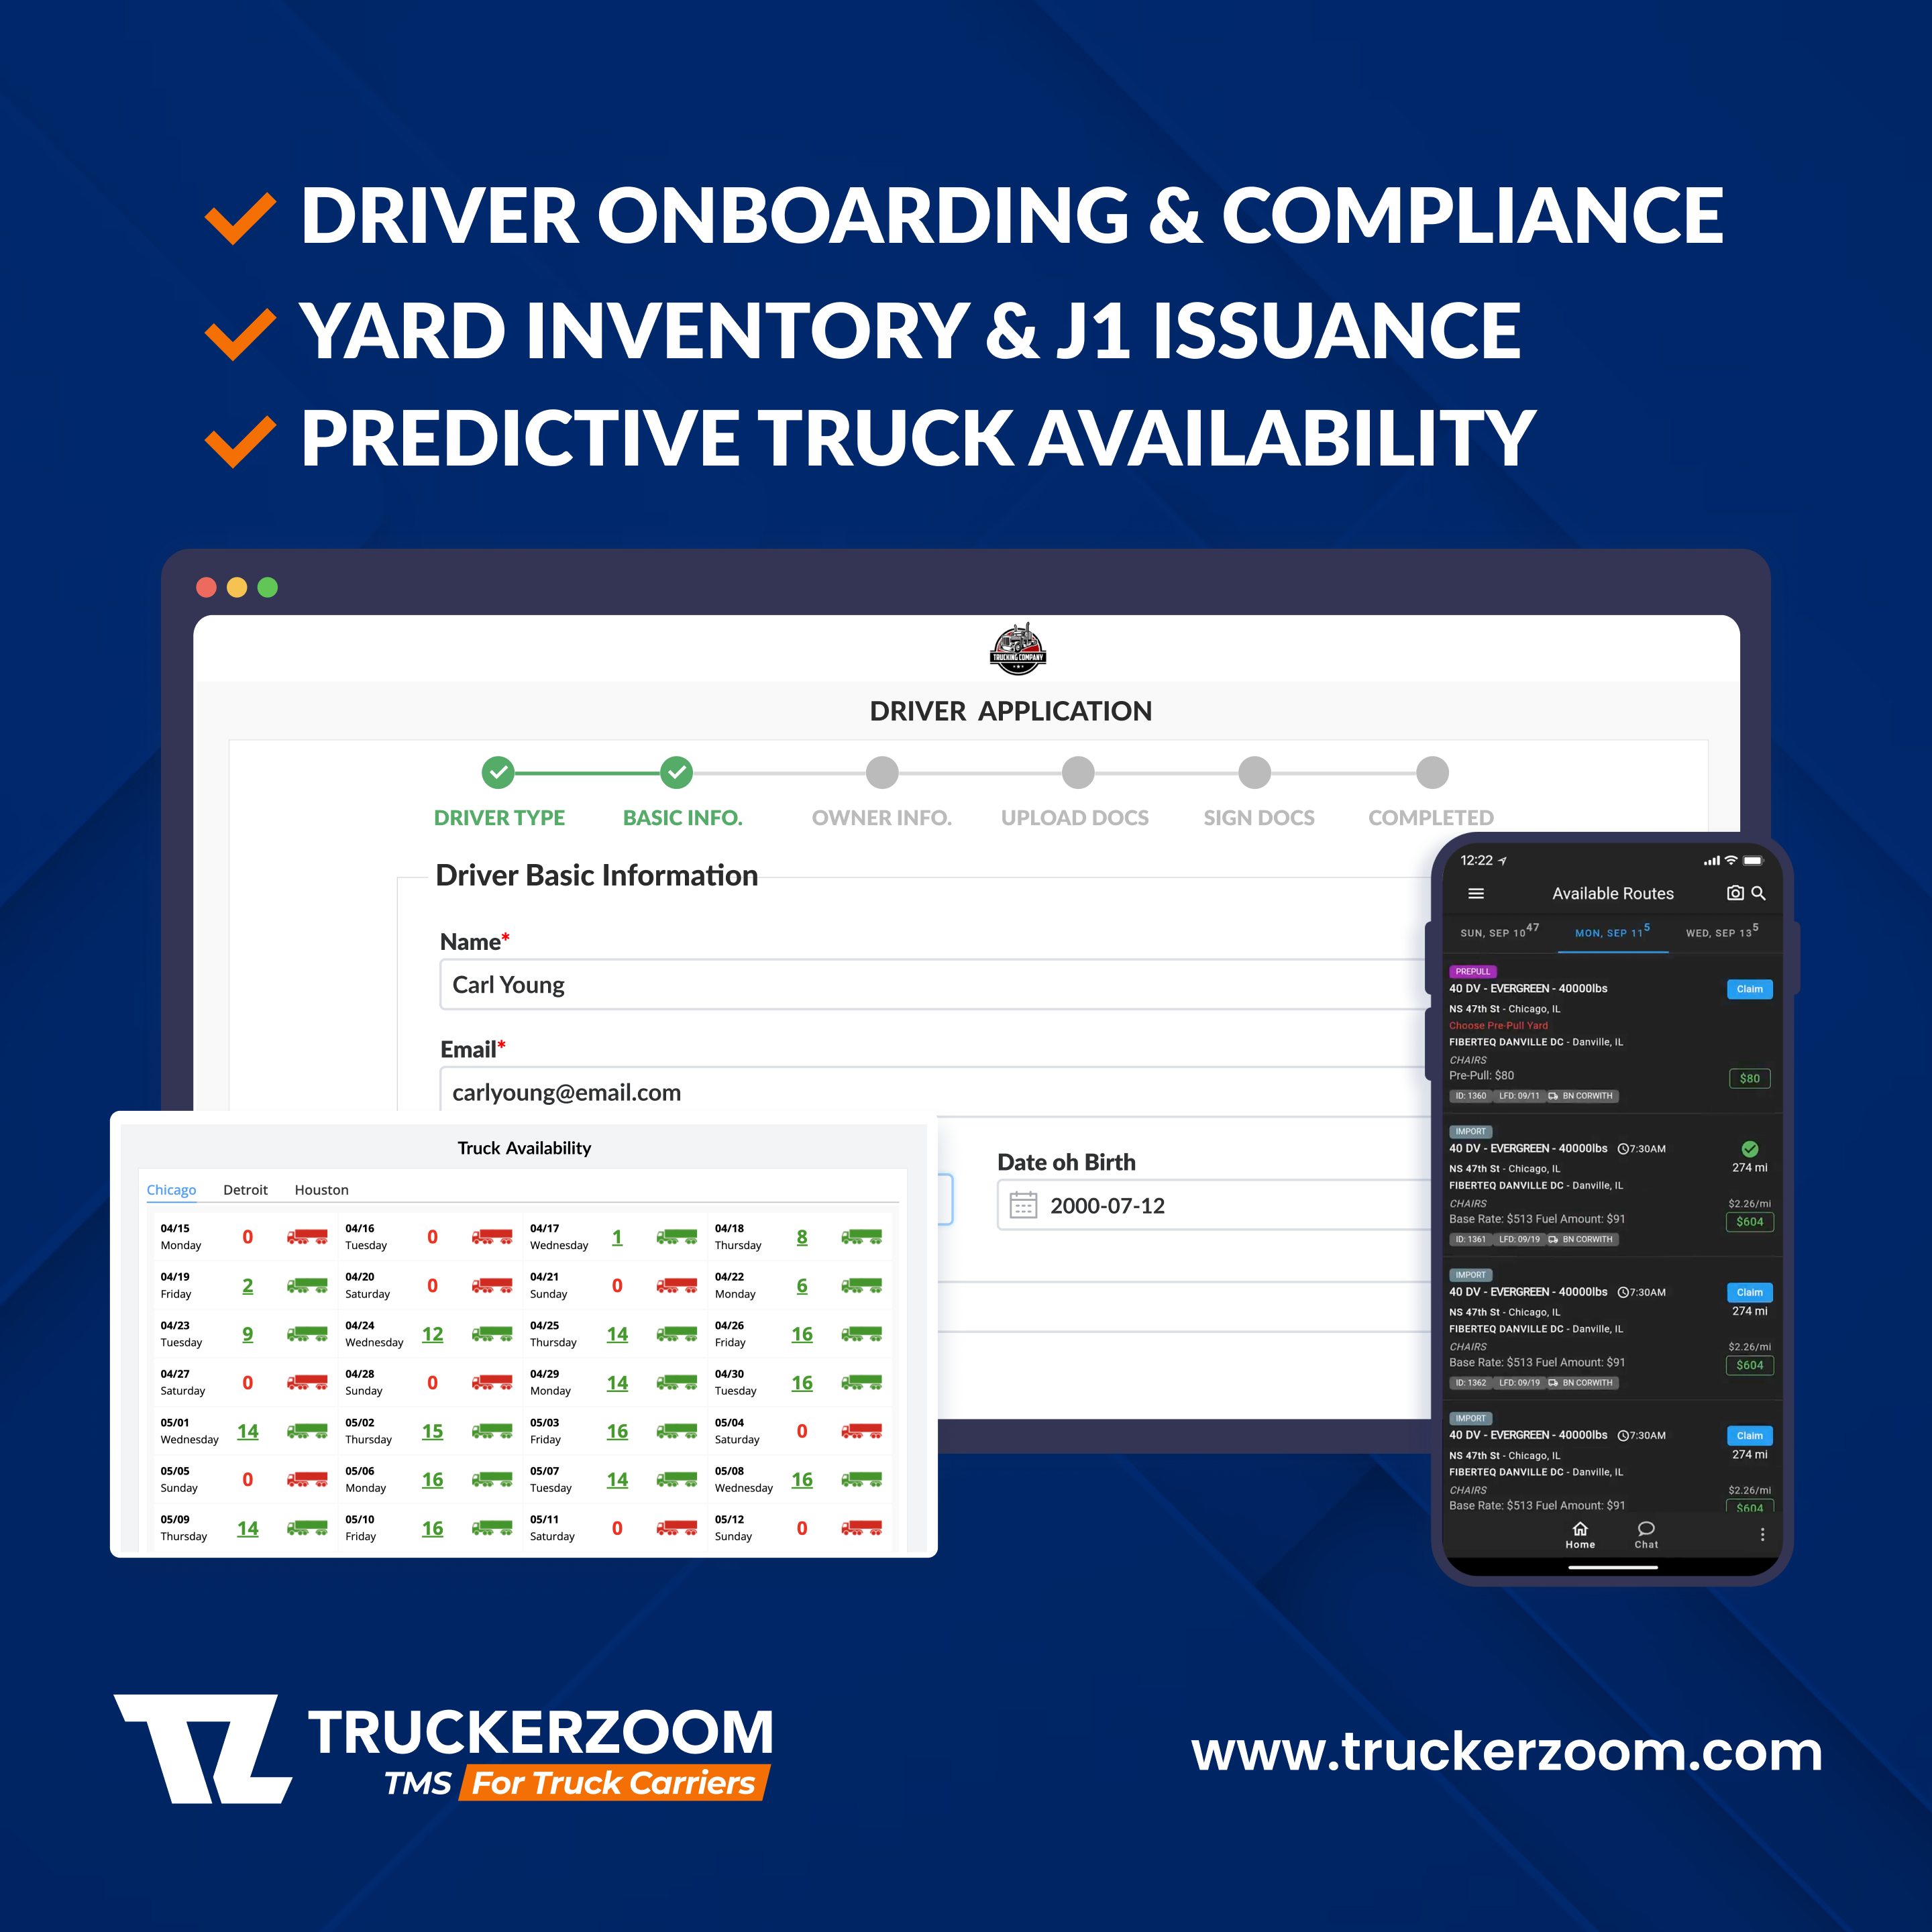 Hire drivers, manage your truck yards, know your truck availability, all in one place